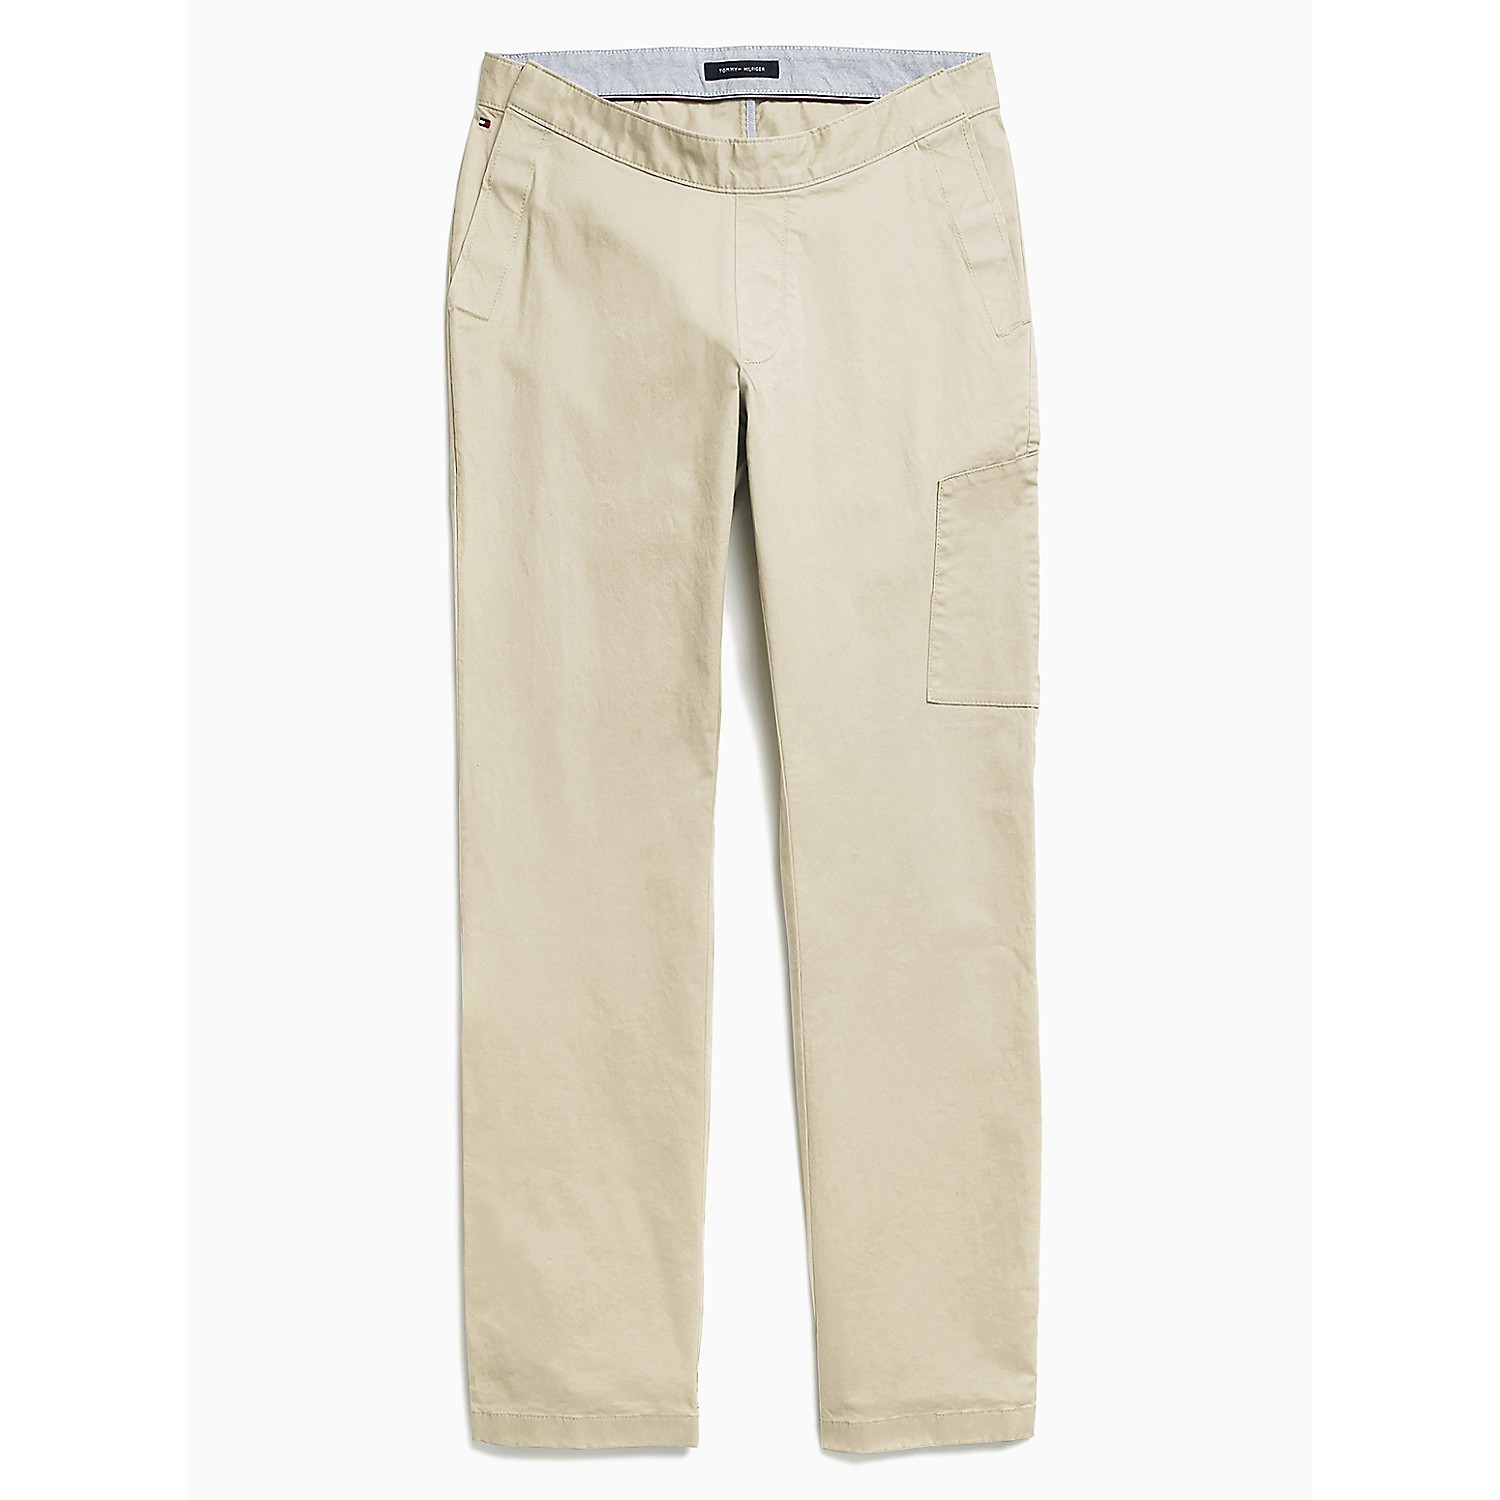 TOMMY HILFIGER Seated Fit Classic Chino